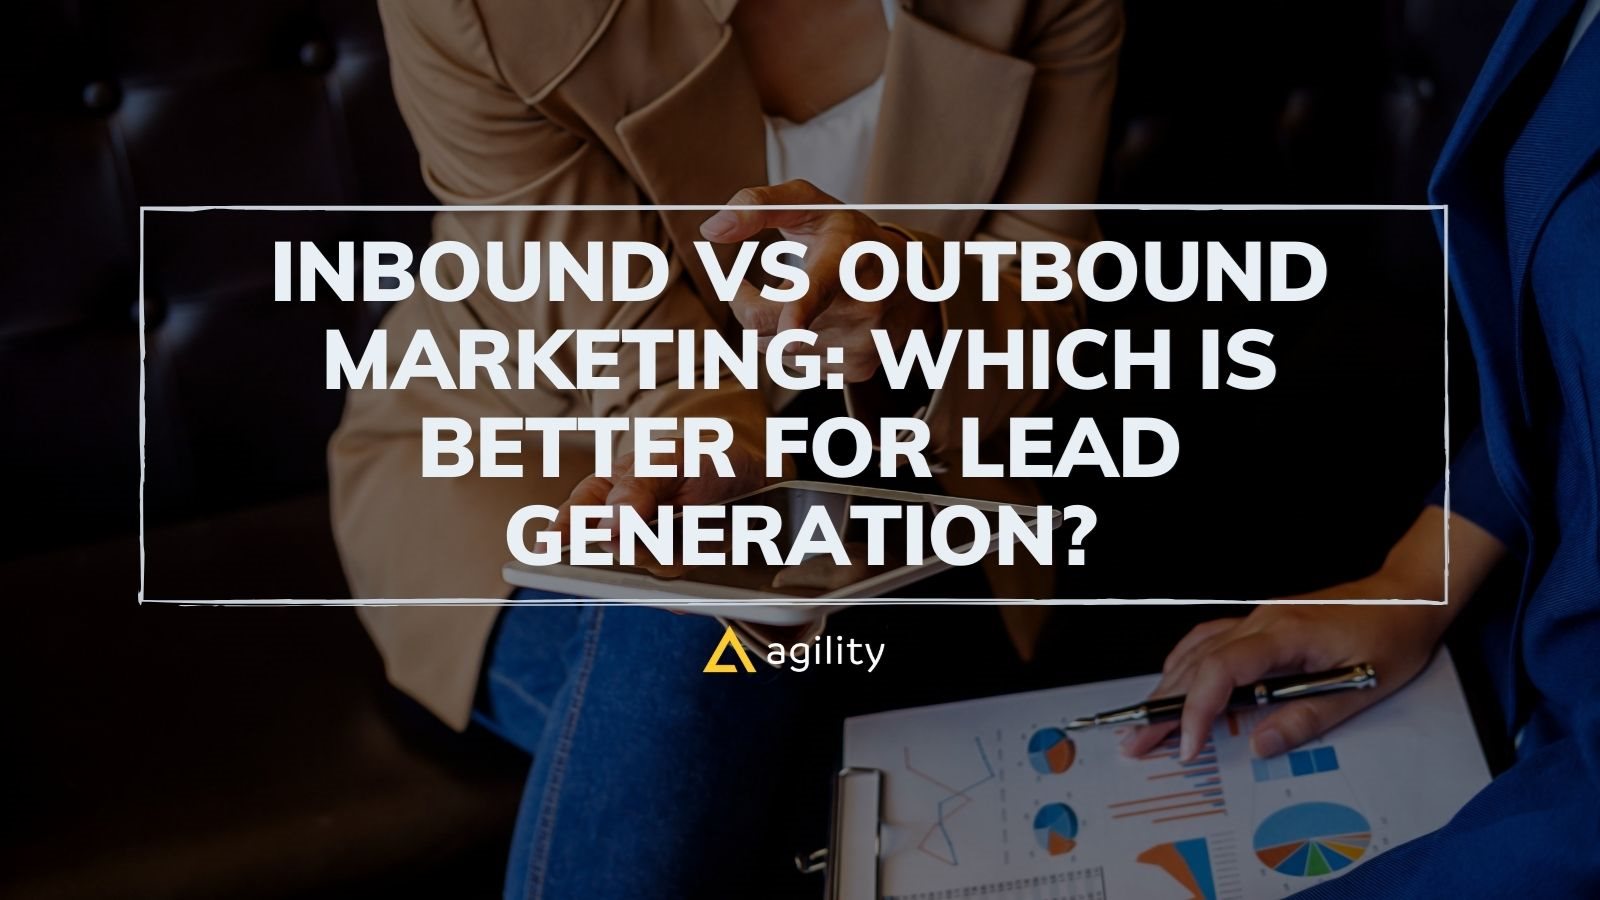 Inbound vs Outbound Marketing: Which Is Better For Lead Generation?